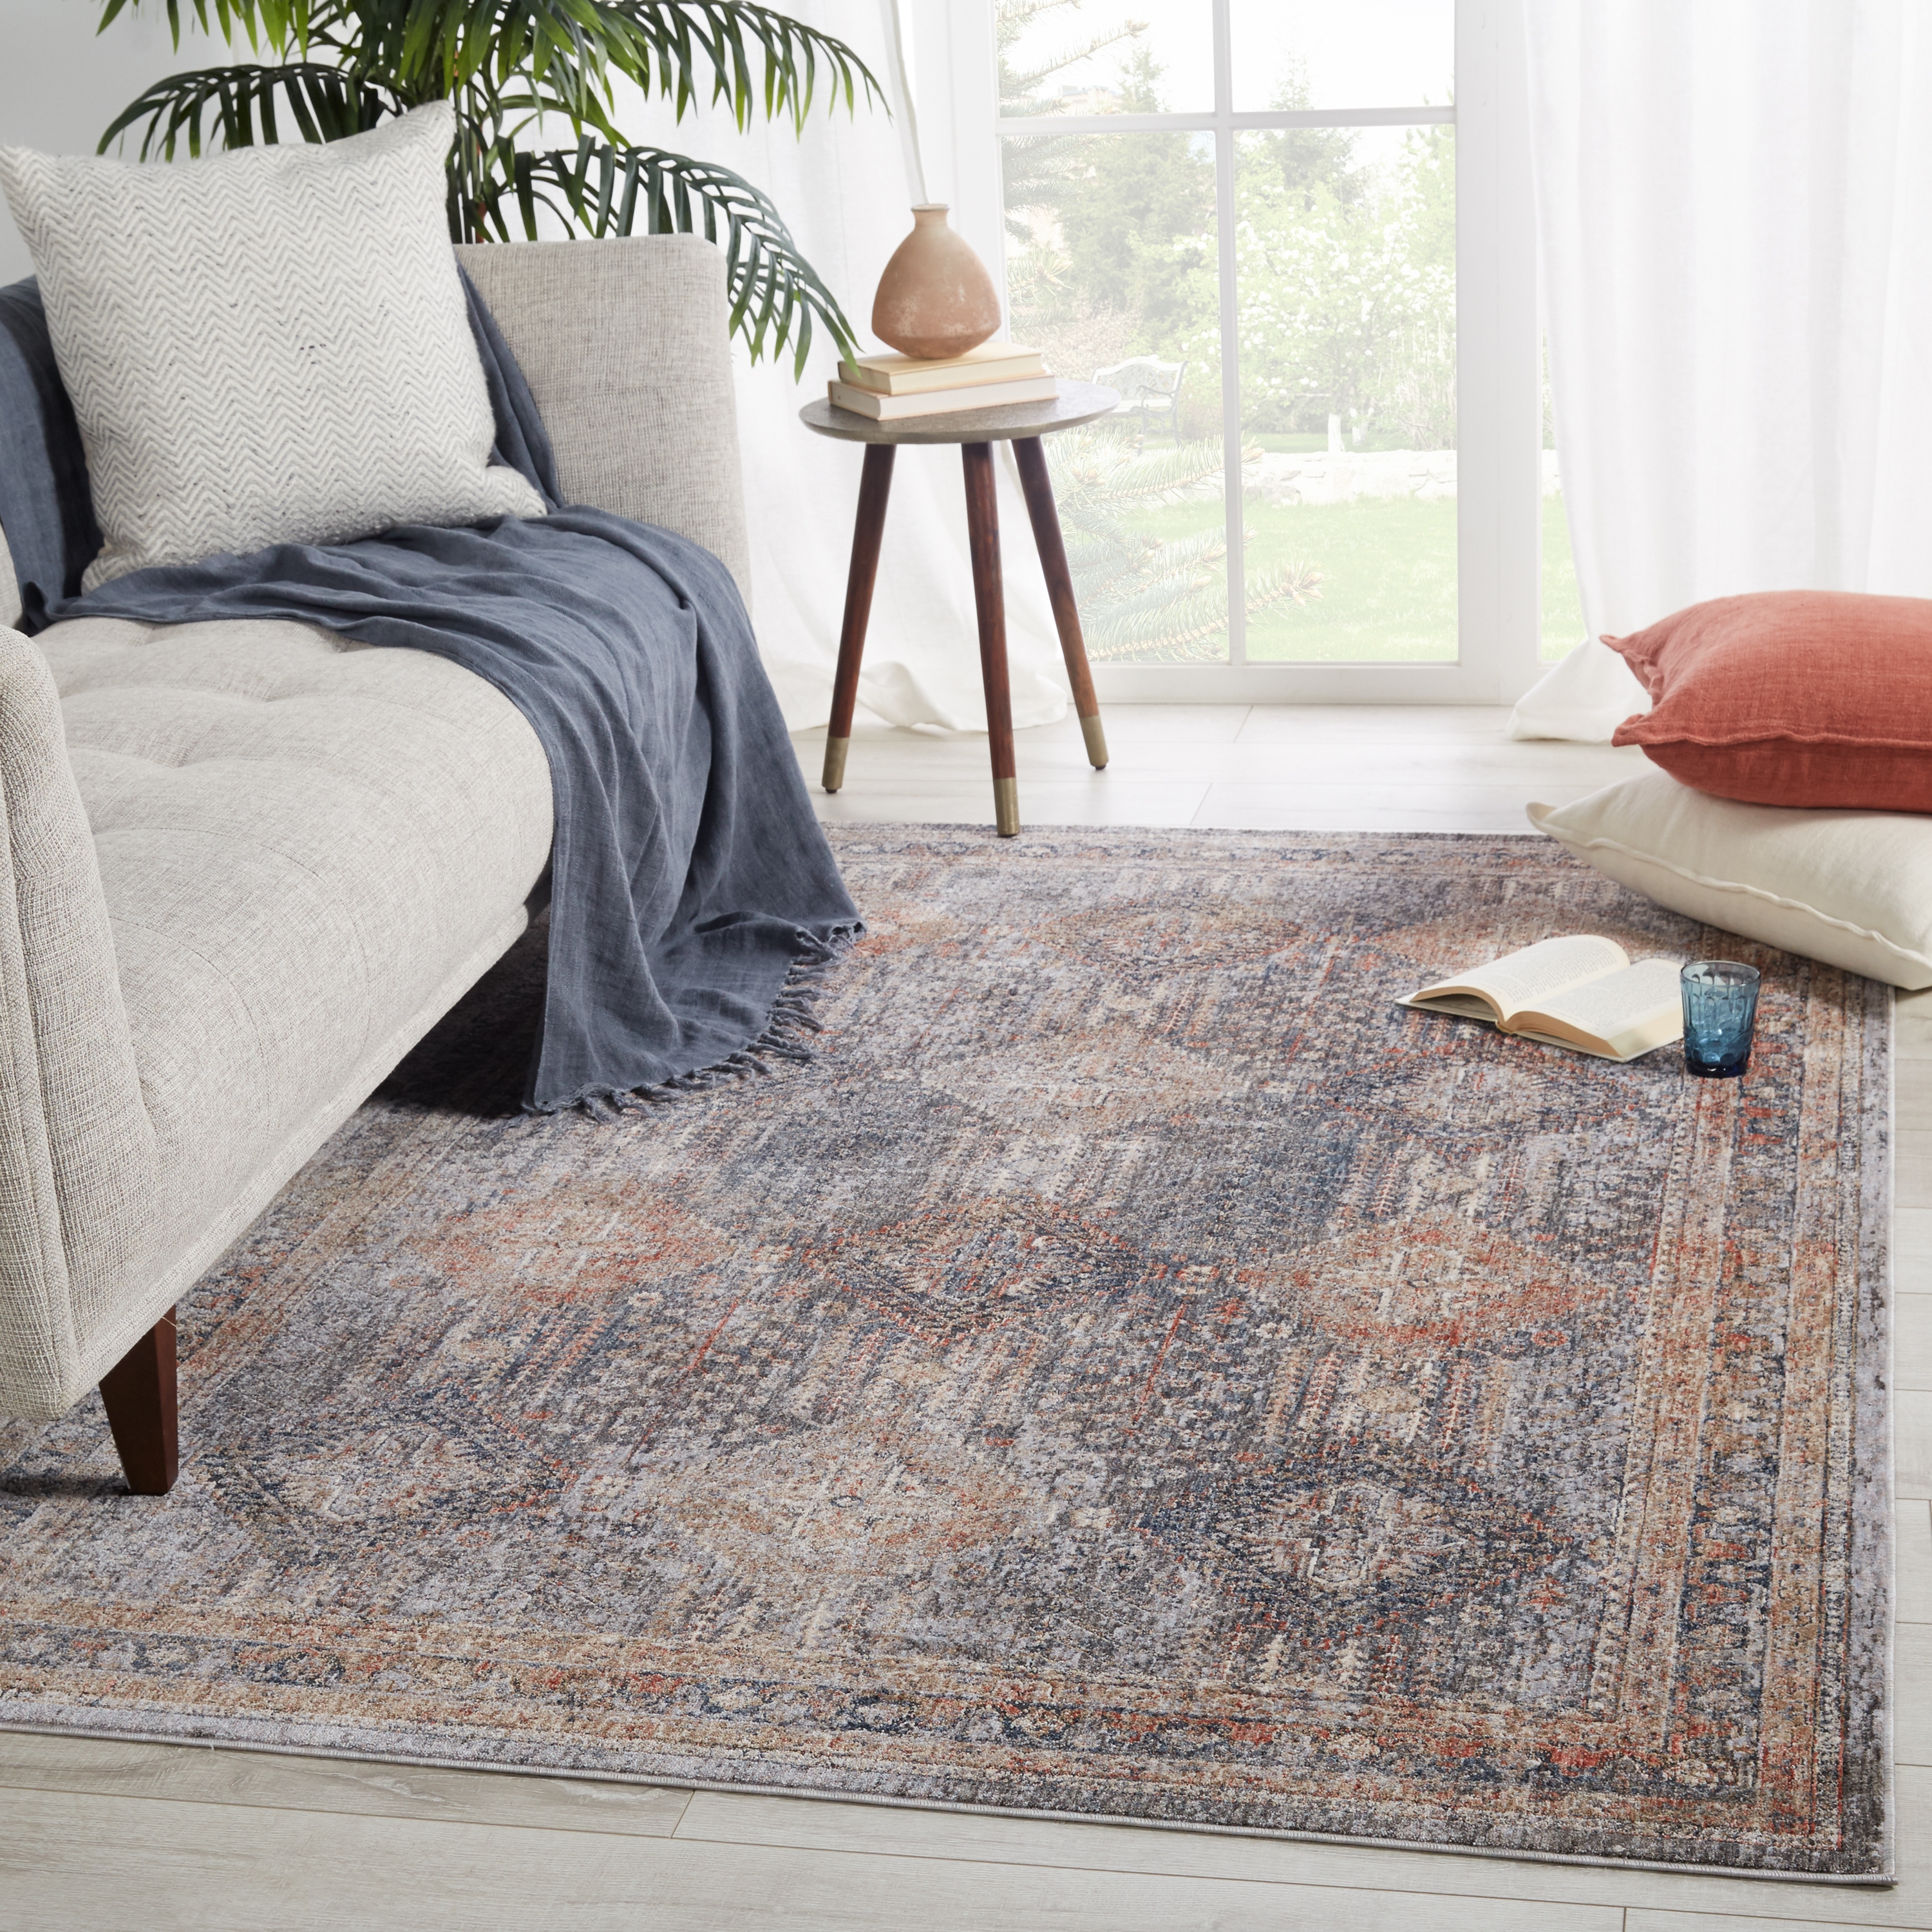 Vibe by Rhosyn Tribal Blue/ Red Area Rug (7'10"X9'9") - Image 4